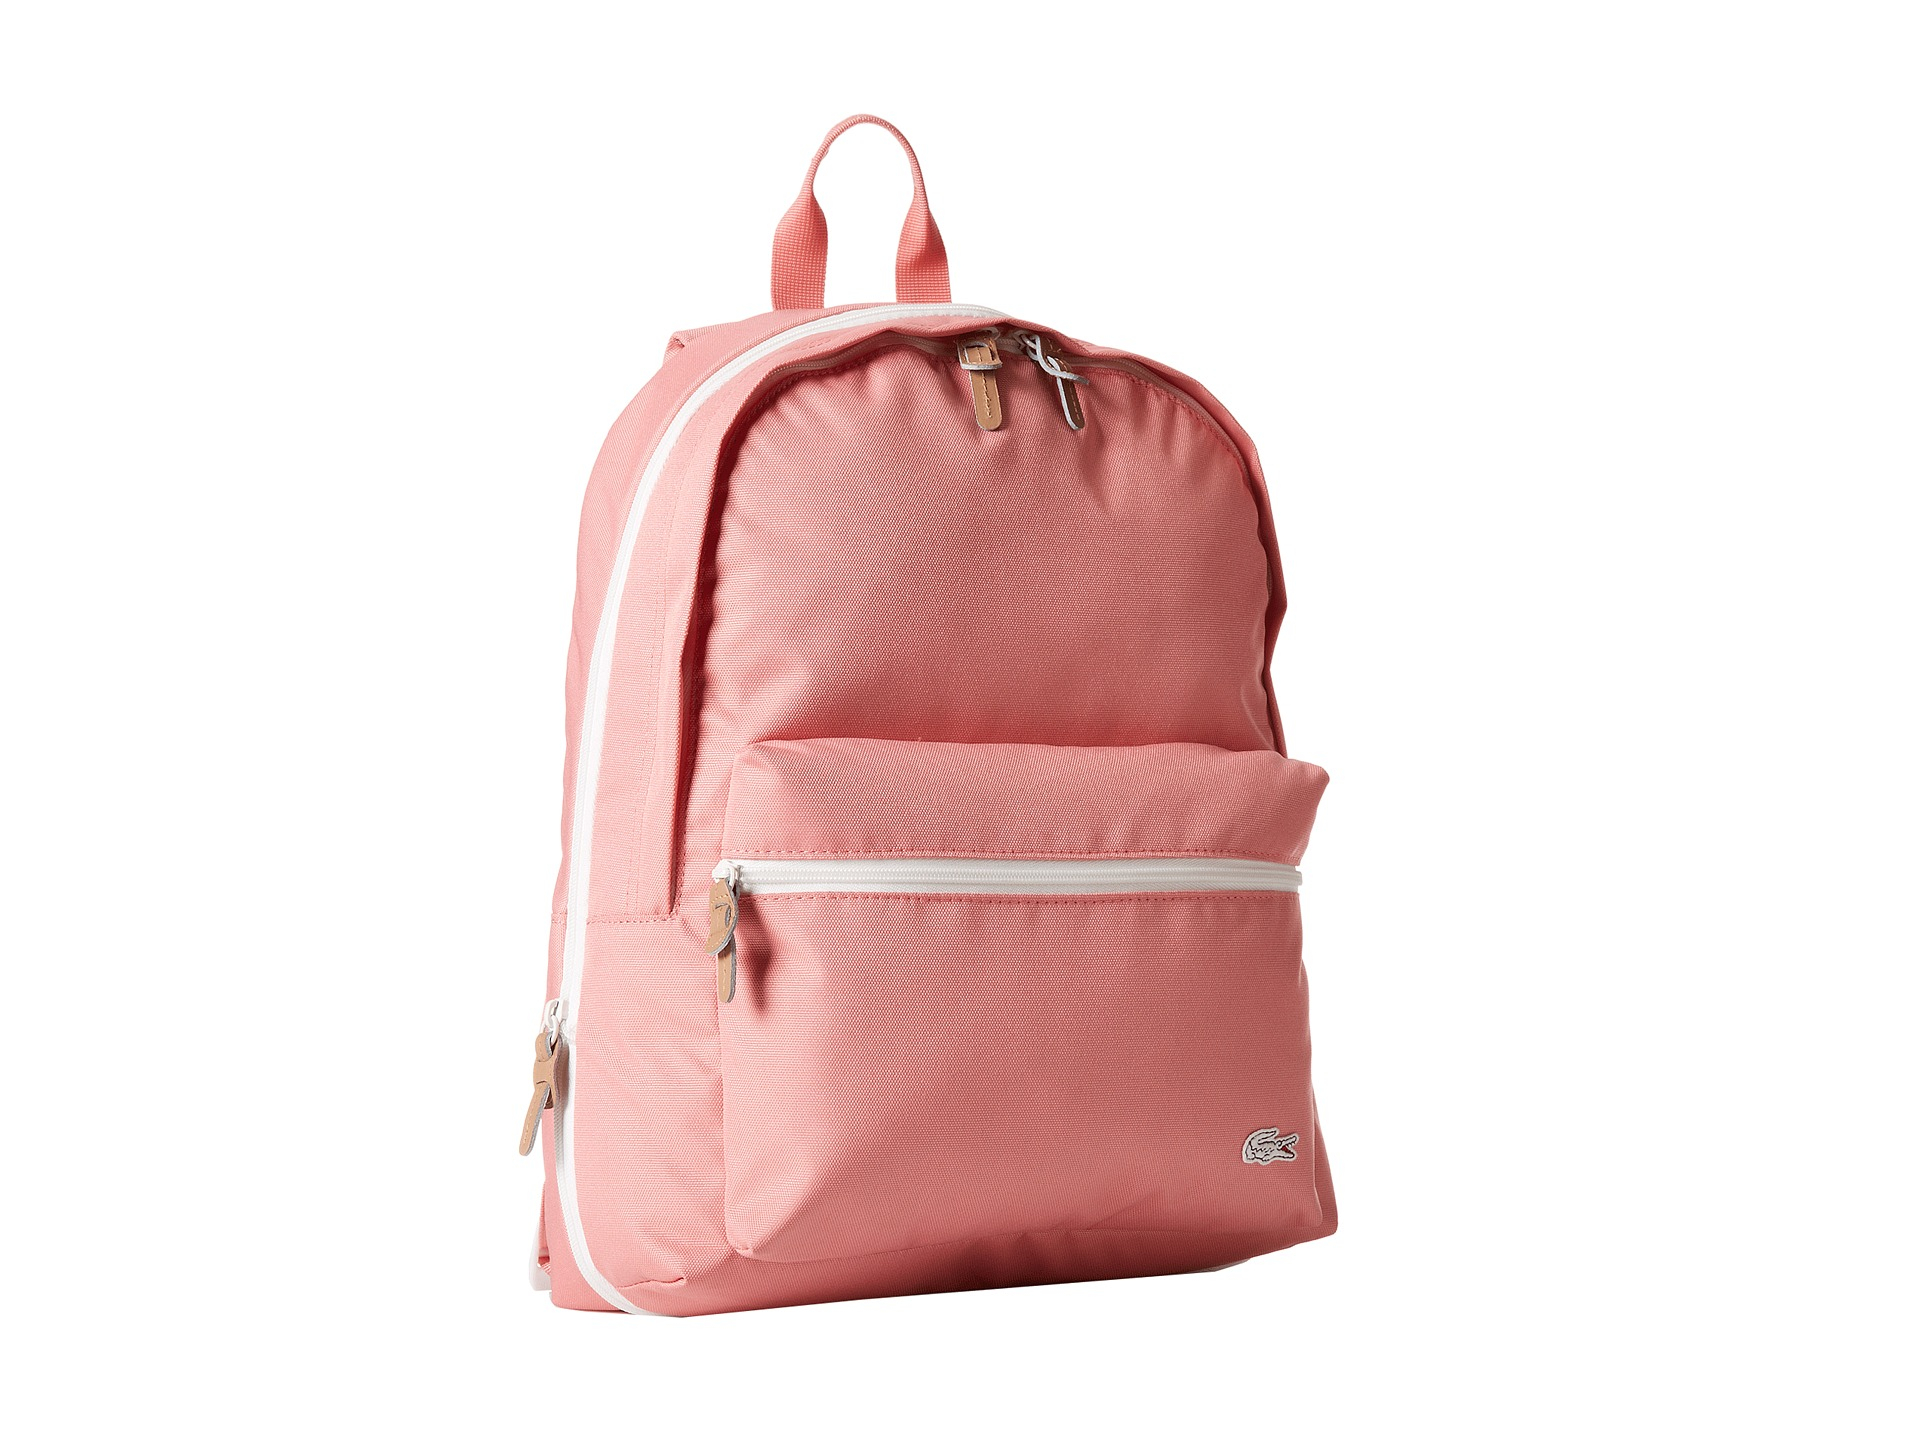 Lacoste Backcroc Pastels Backpack in 